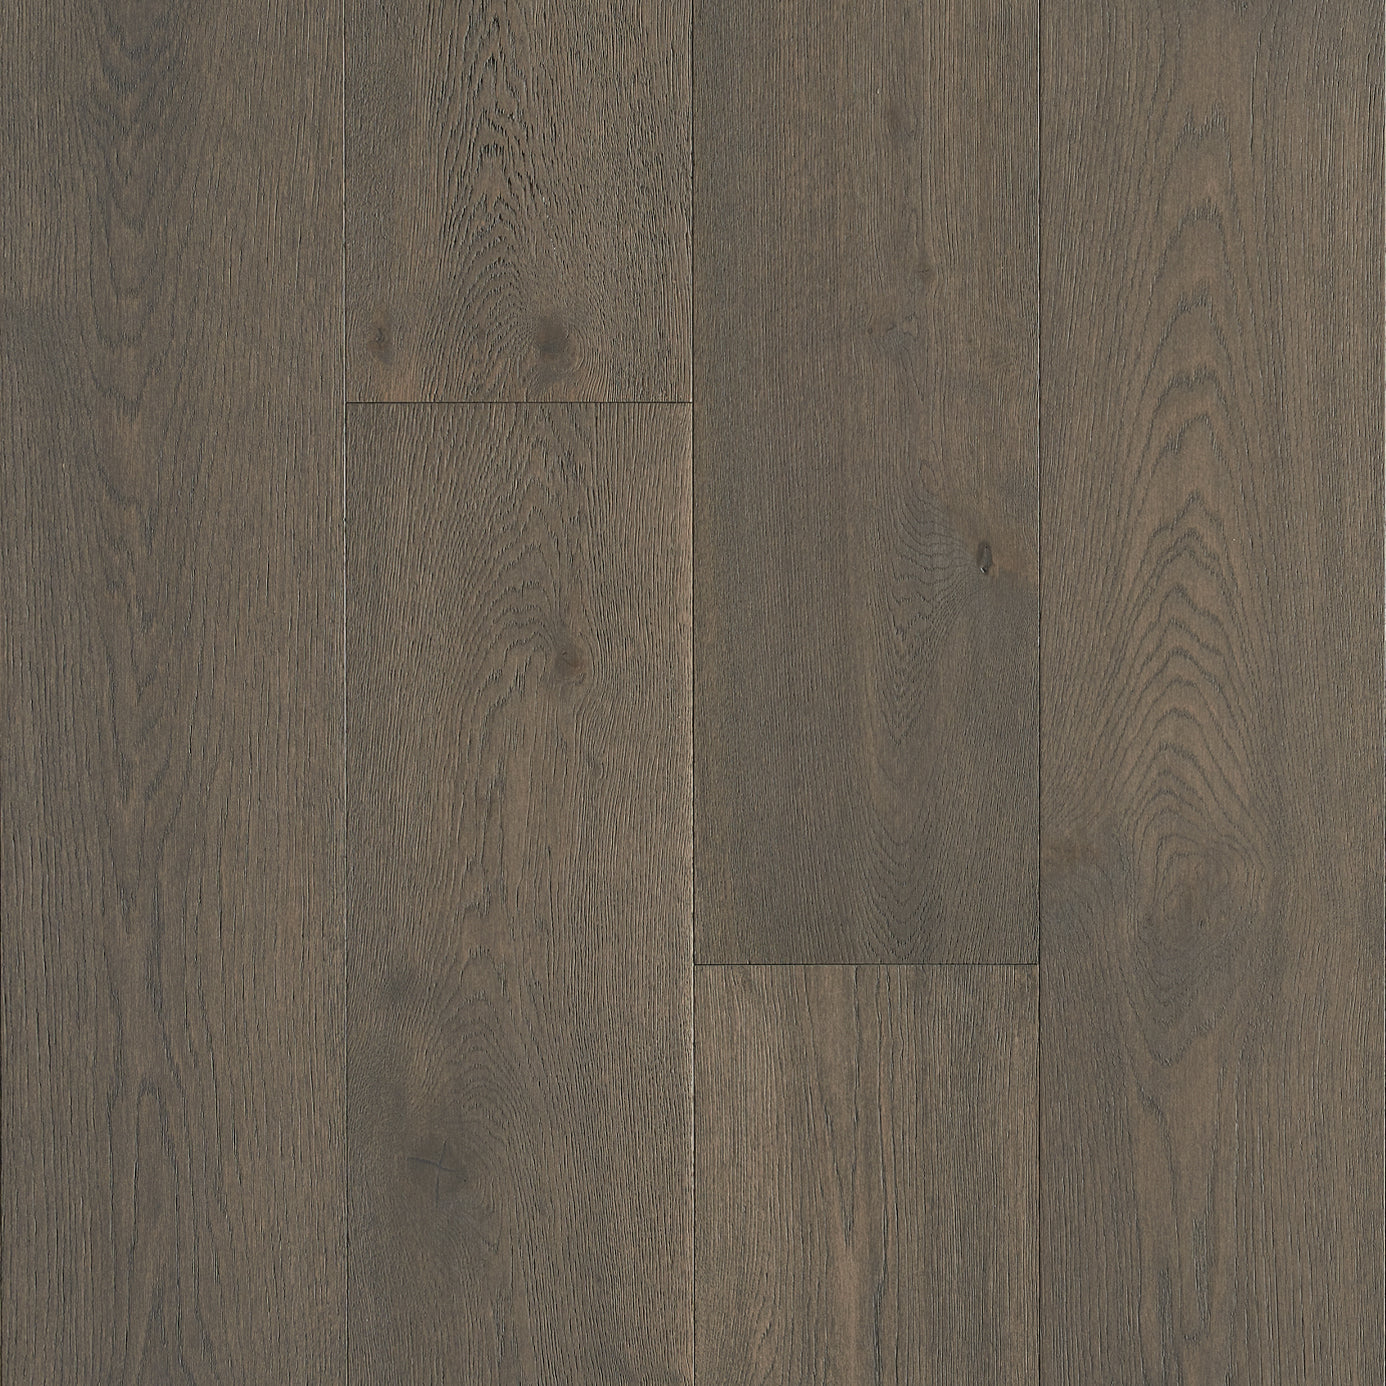 Bruce - Brushed Impressions Platinum Collection - 9 in. White Oak Hardwood - Calming Touch